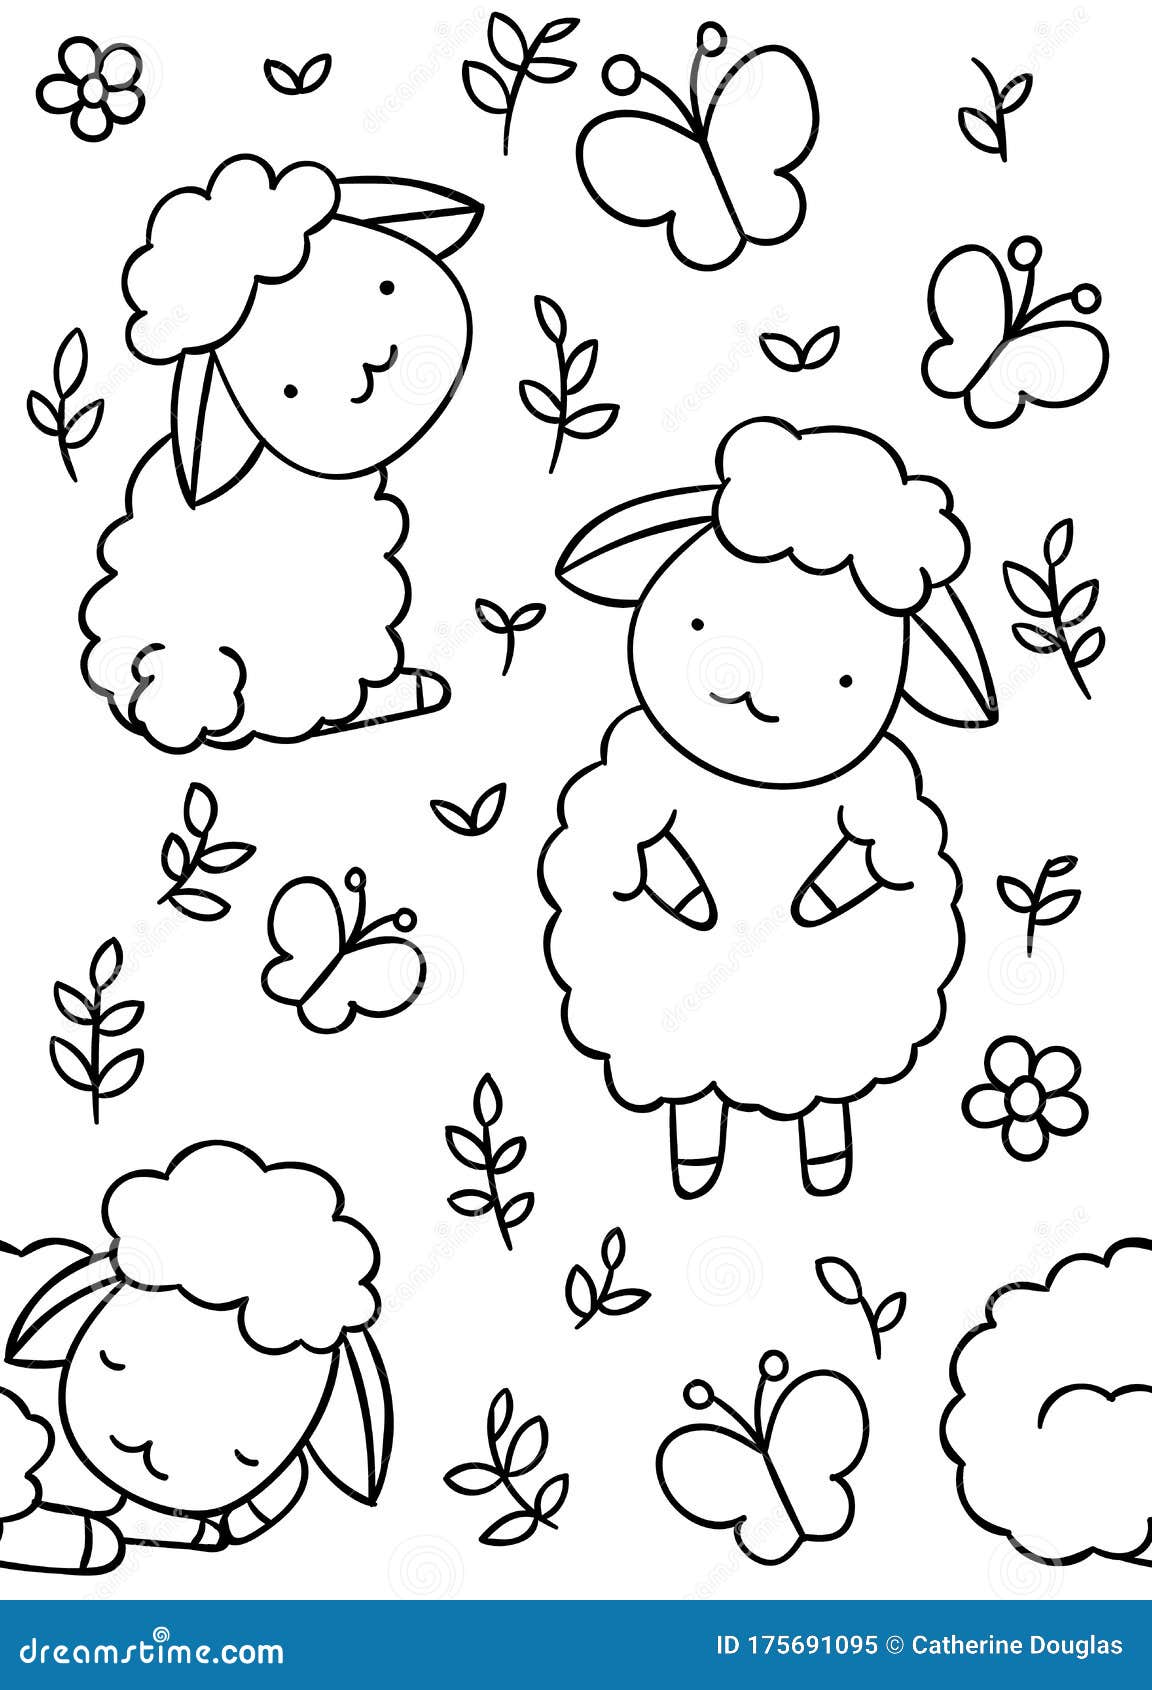 Sheep coloring pages stock illustrations â sheep coloring pages stock illustrations vectors clipart